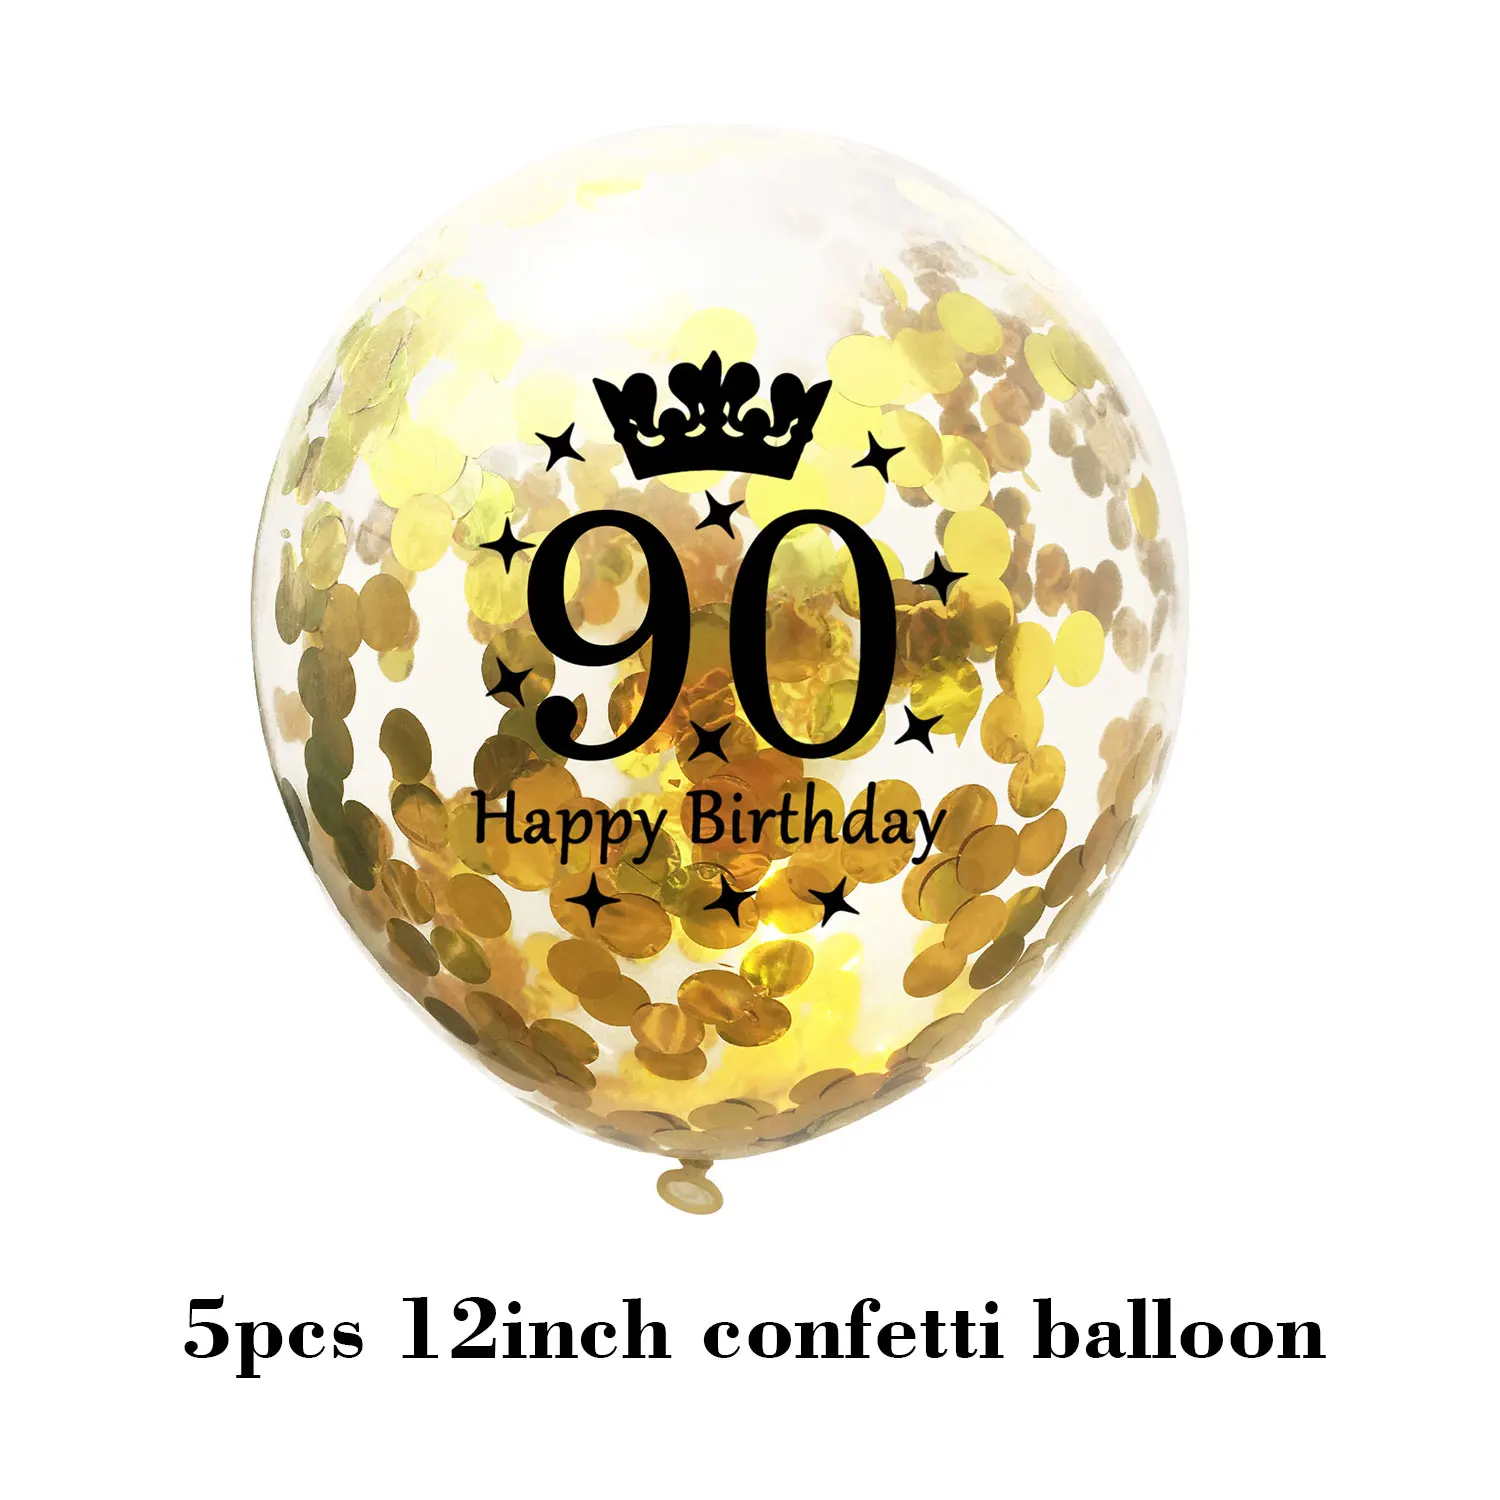 Happy Birthday Confetti Balloon Number Balloon Adult Birthday Cake Topper Gift Sticker For 16 18 21 30 40 50 60 Years Decoration - Цвет: 90 gold balloon